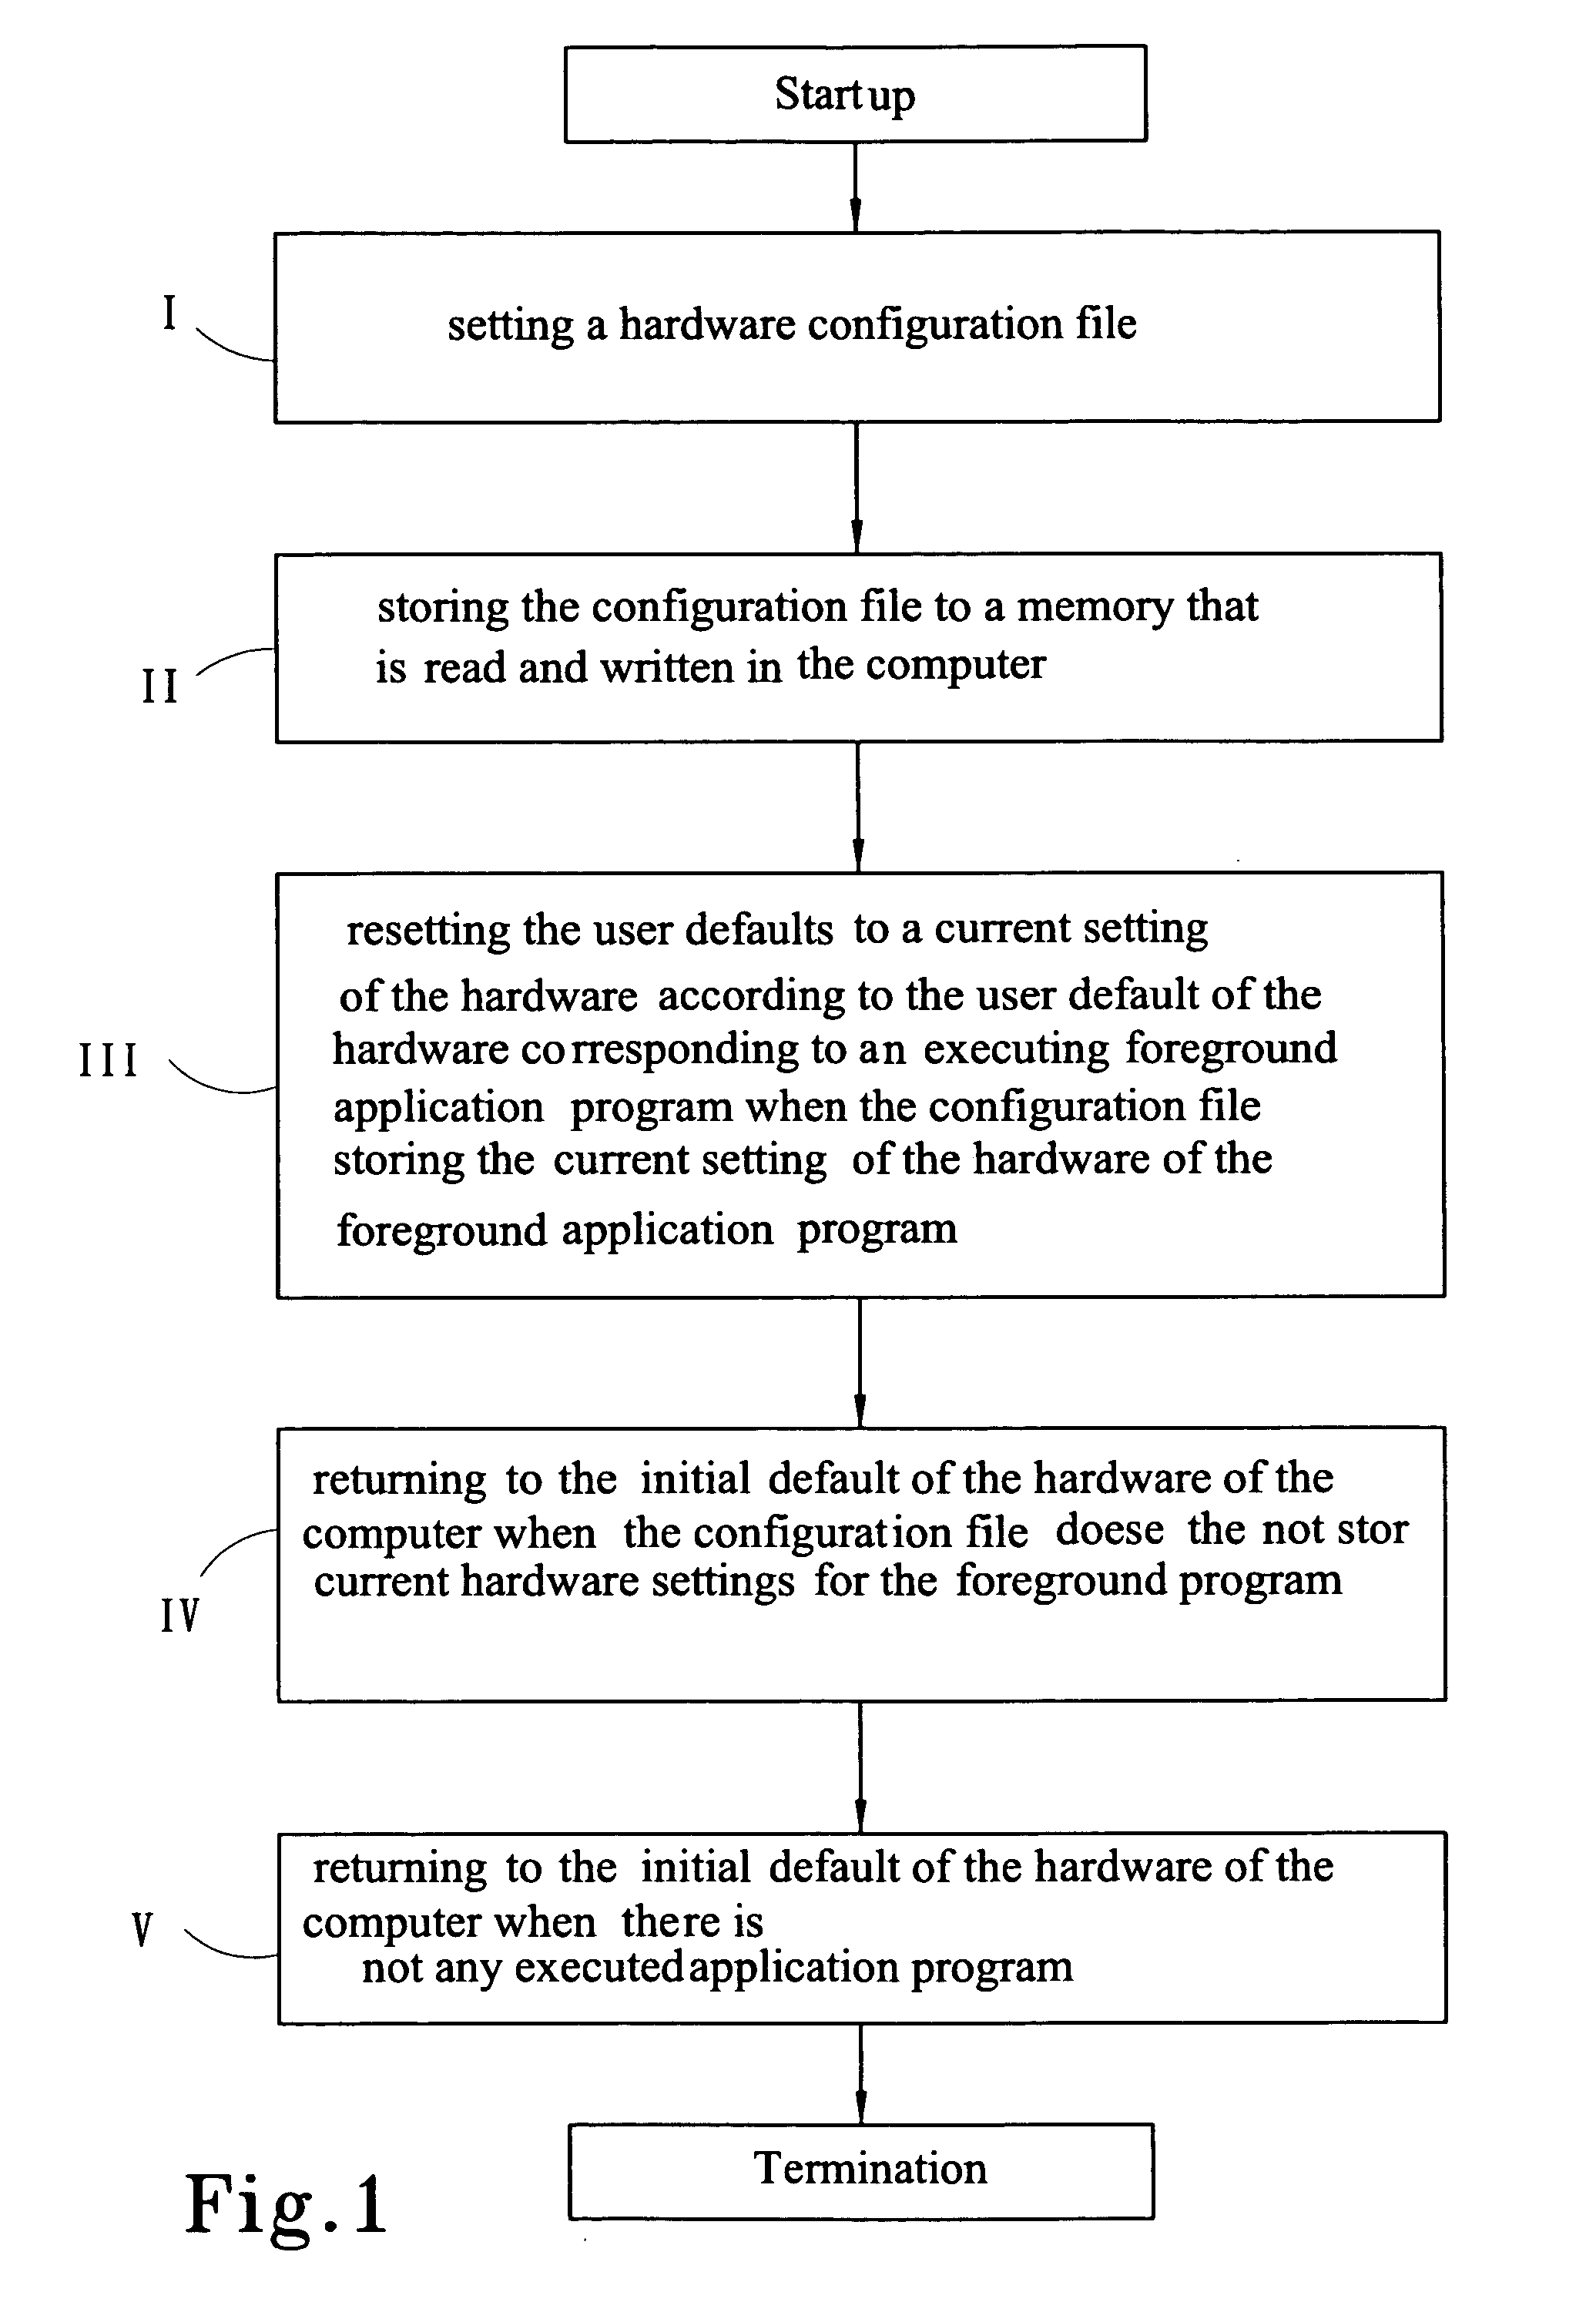 Method for automatically changing the hardware settings of a computer in accordance with an executing application program